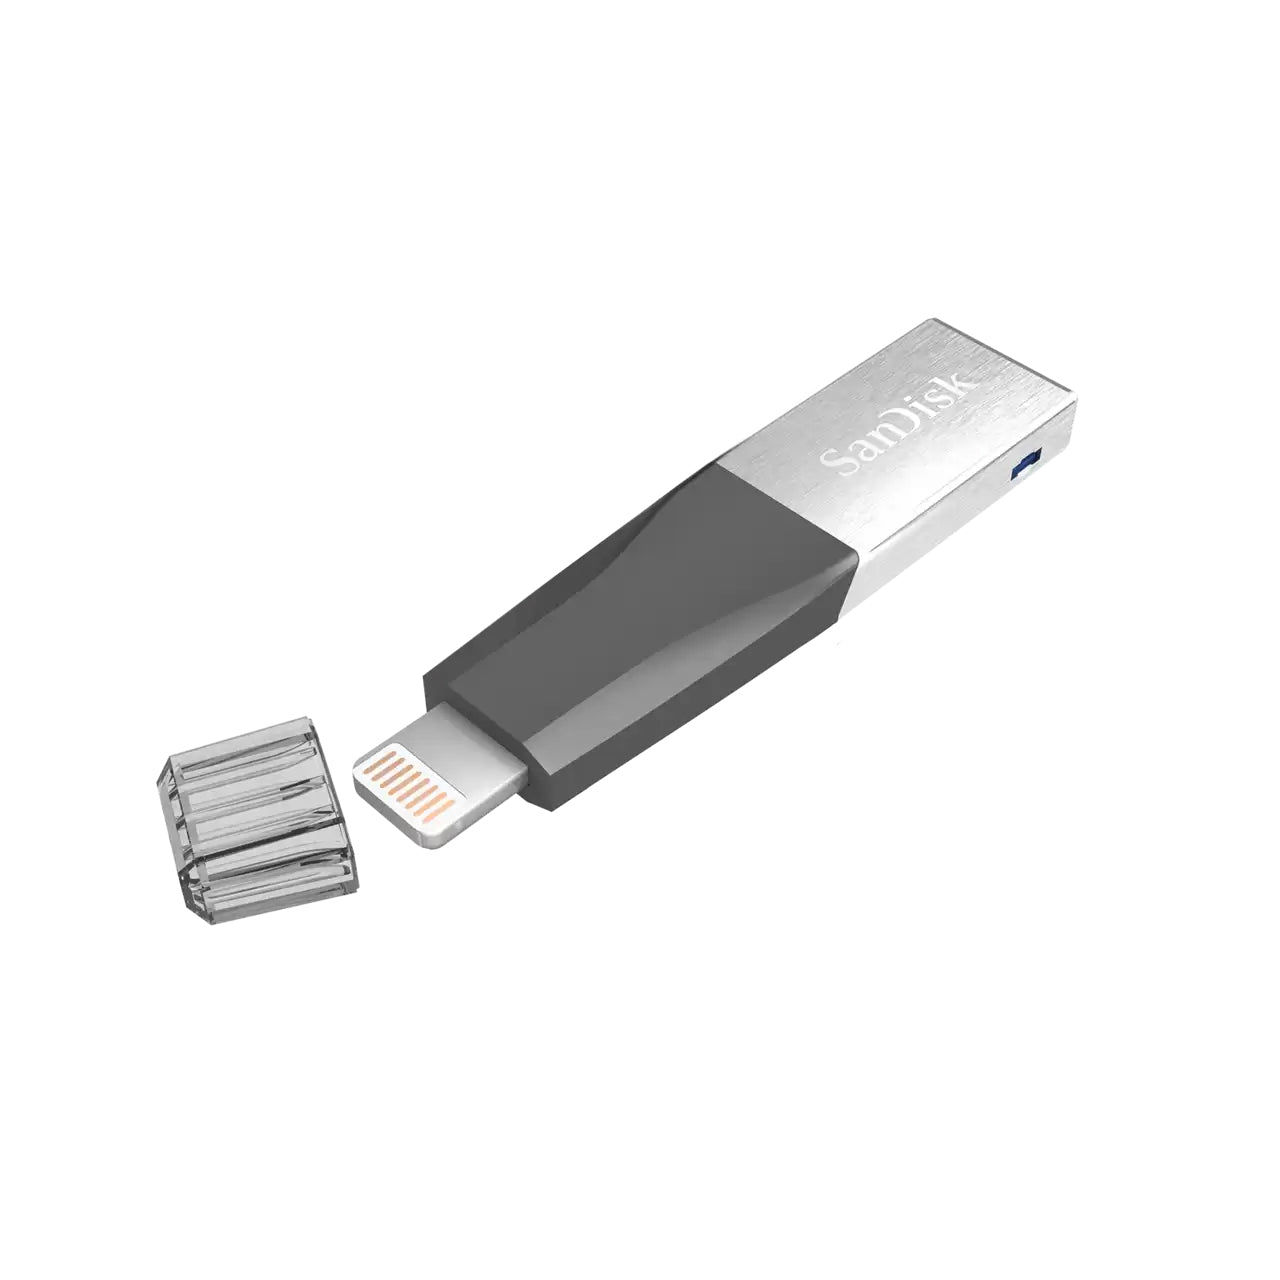 SanDisk iXpand OTG to USB 3.0 Mini Flash Drive with W – JG Superstore